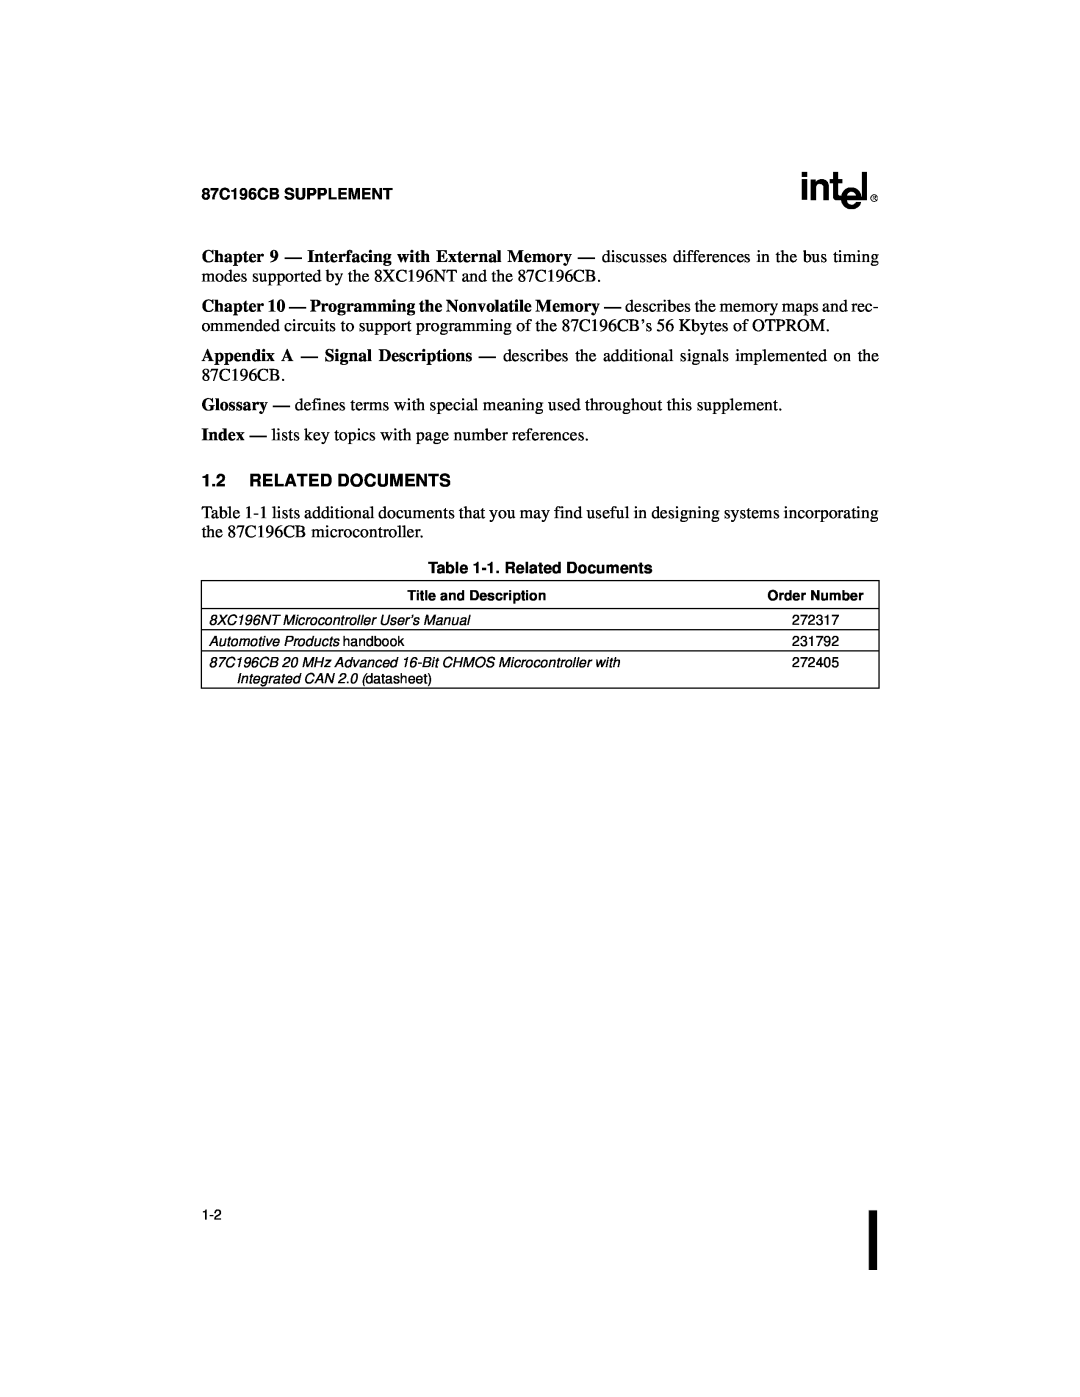 Intel 8XC196NT, 87C196CB user manual Related Documents, Interfacing with External Memory, Appendix A - Signal Descriptions 